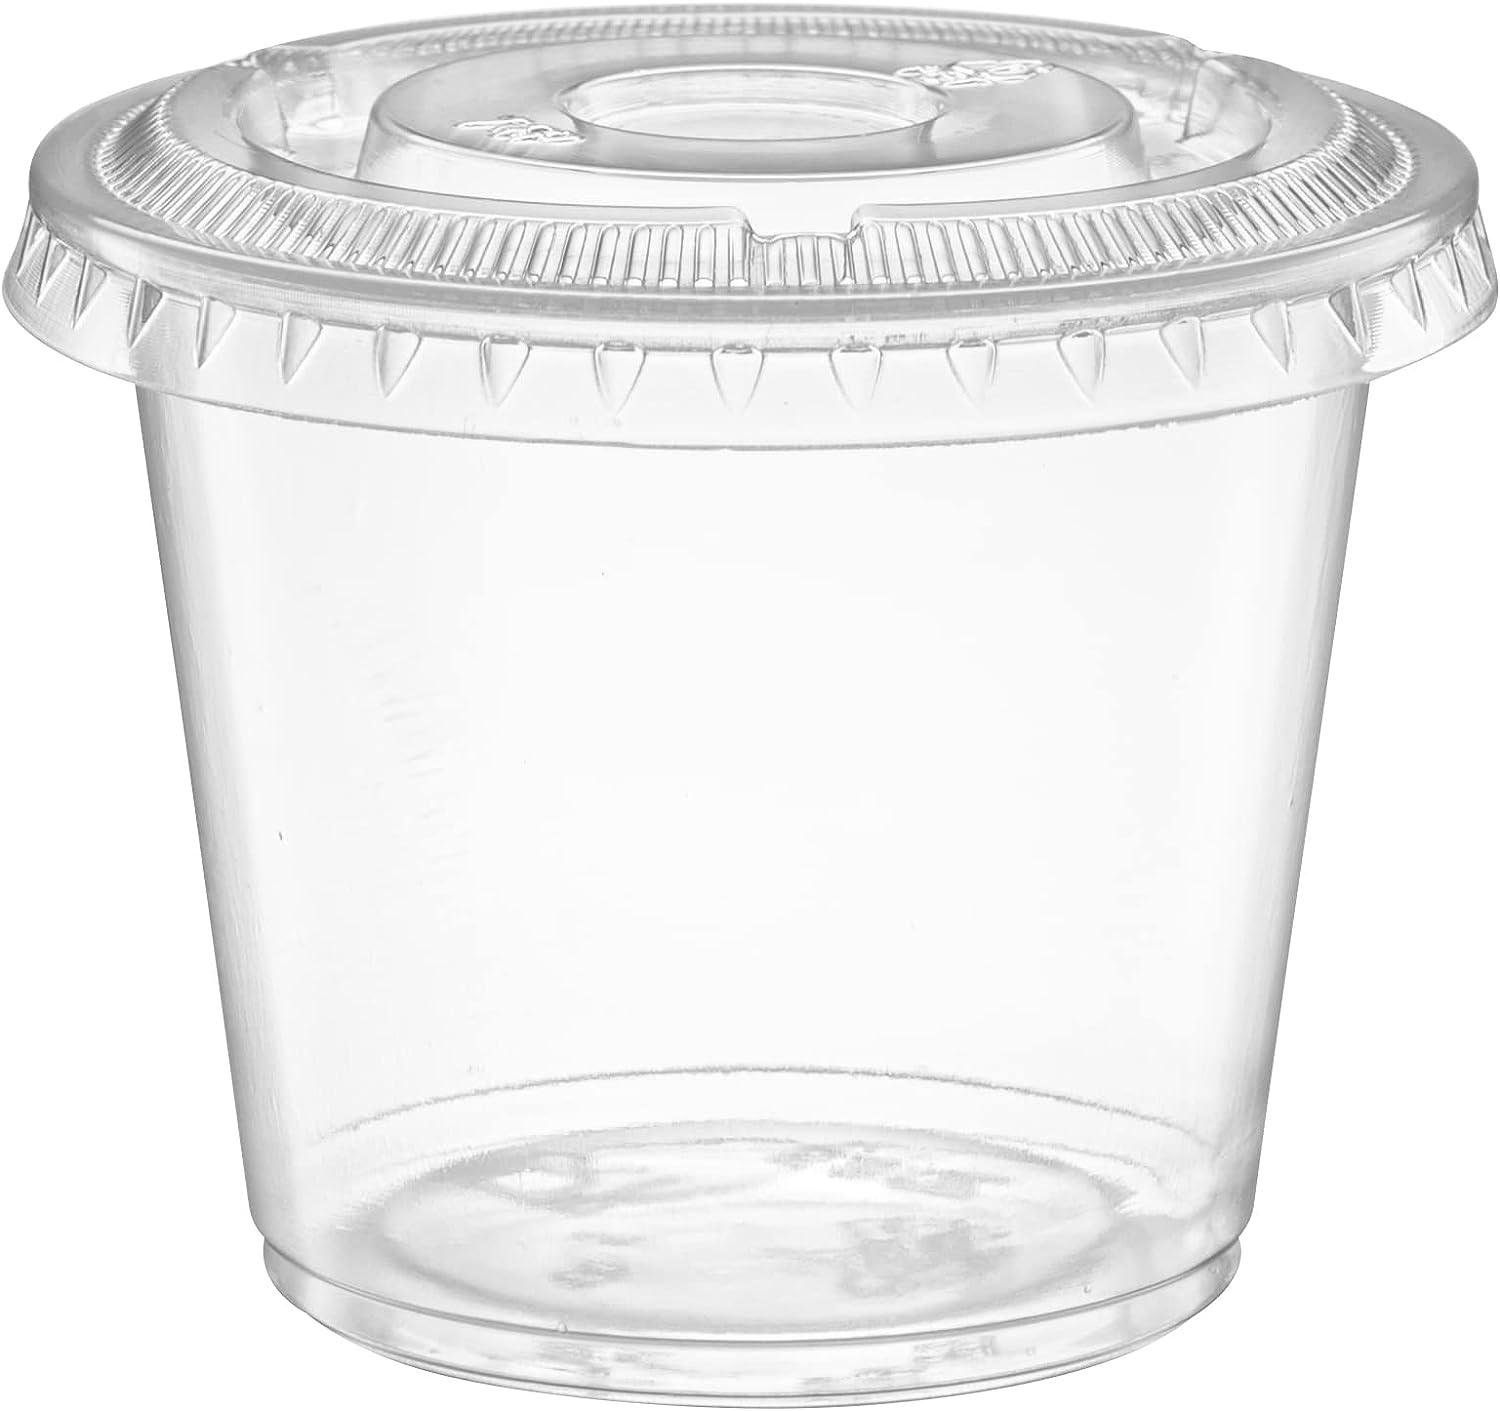 5 oz - 200 Sets Clear Diposable Plastic Portion Cups With Lids